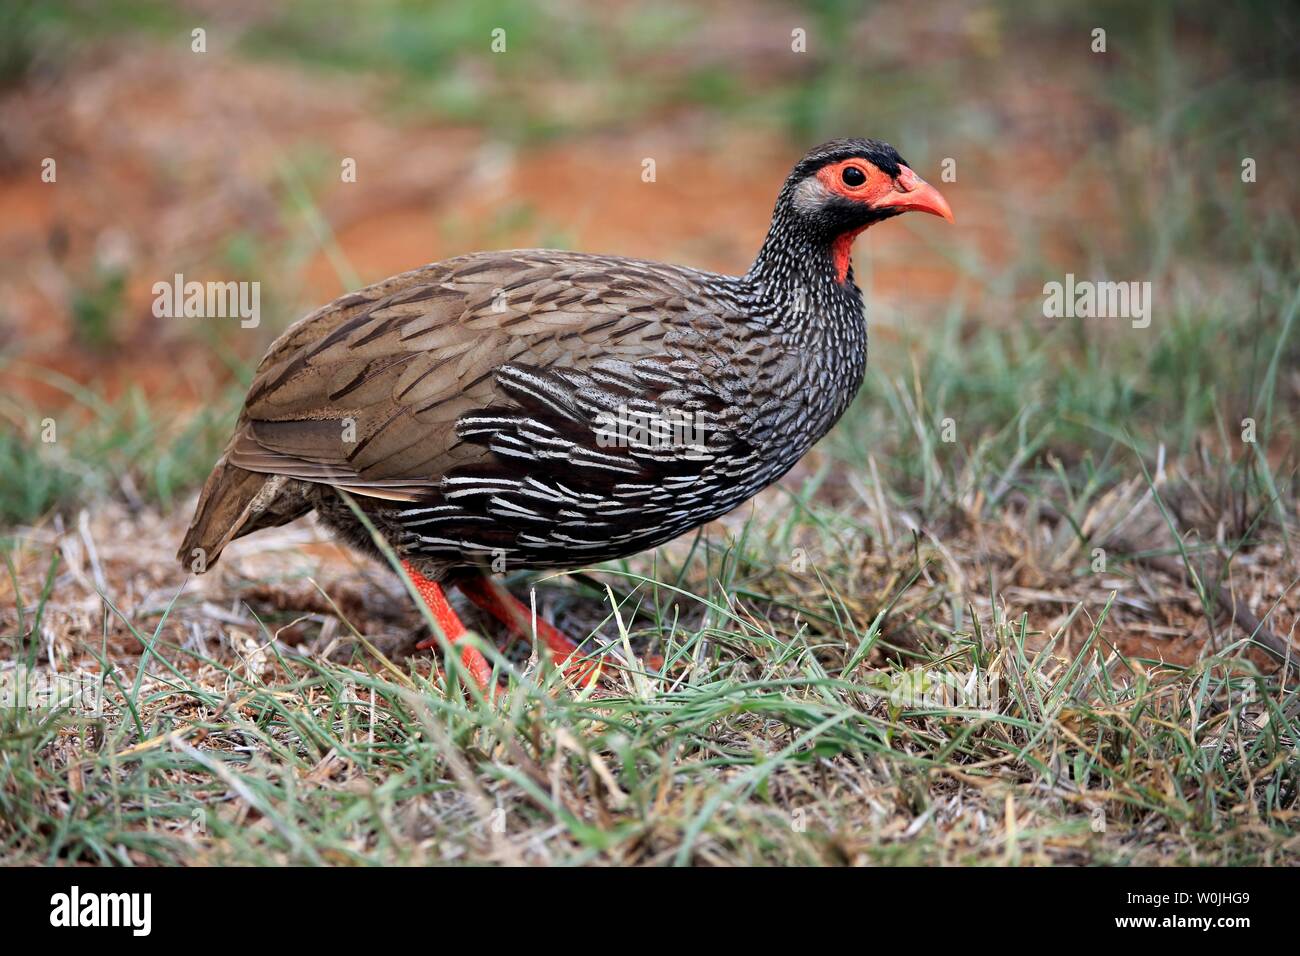 Red-necked spurfowl (Francolinus afer), adult, standing in the grass, Addo Elephant National Park, Eastern Cape, South Africa Stock Photo